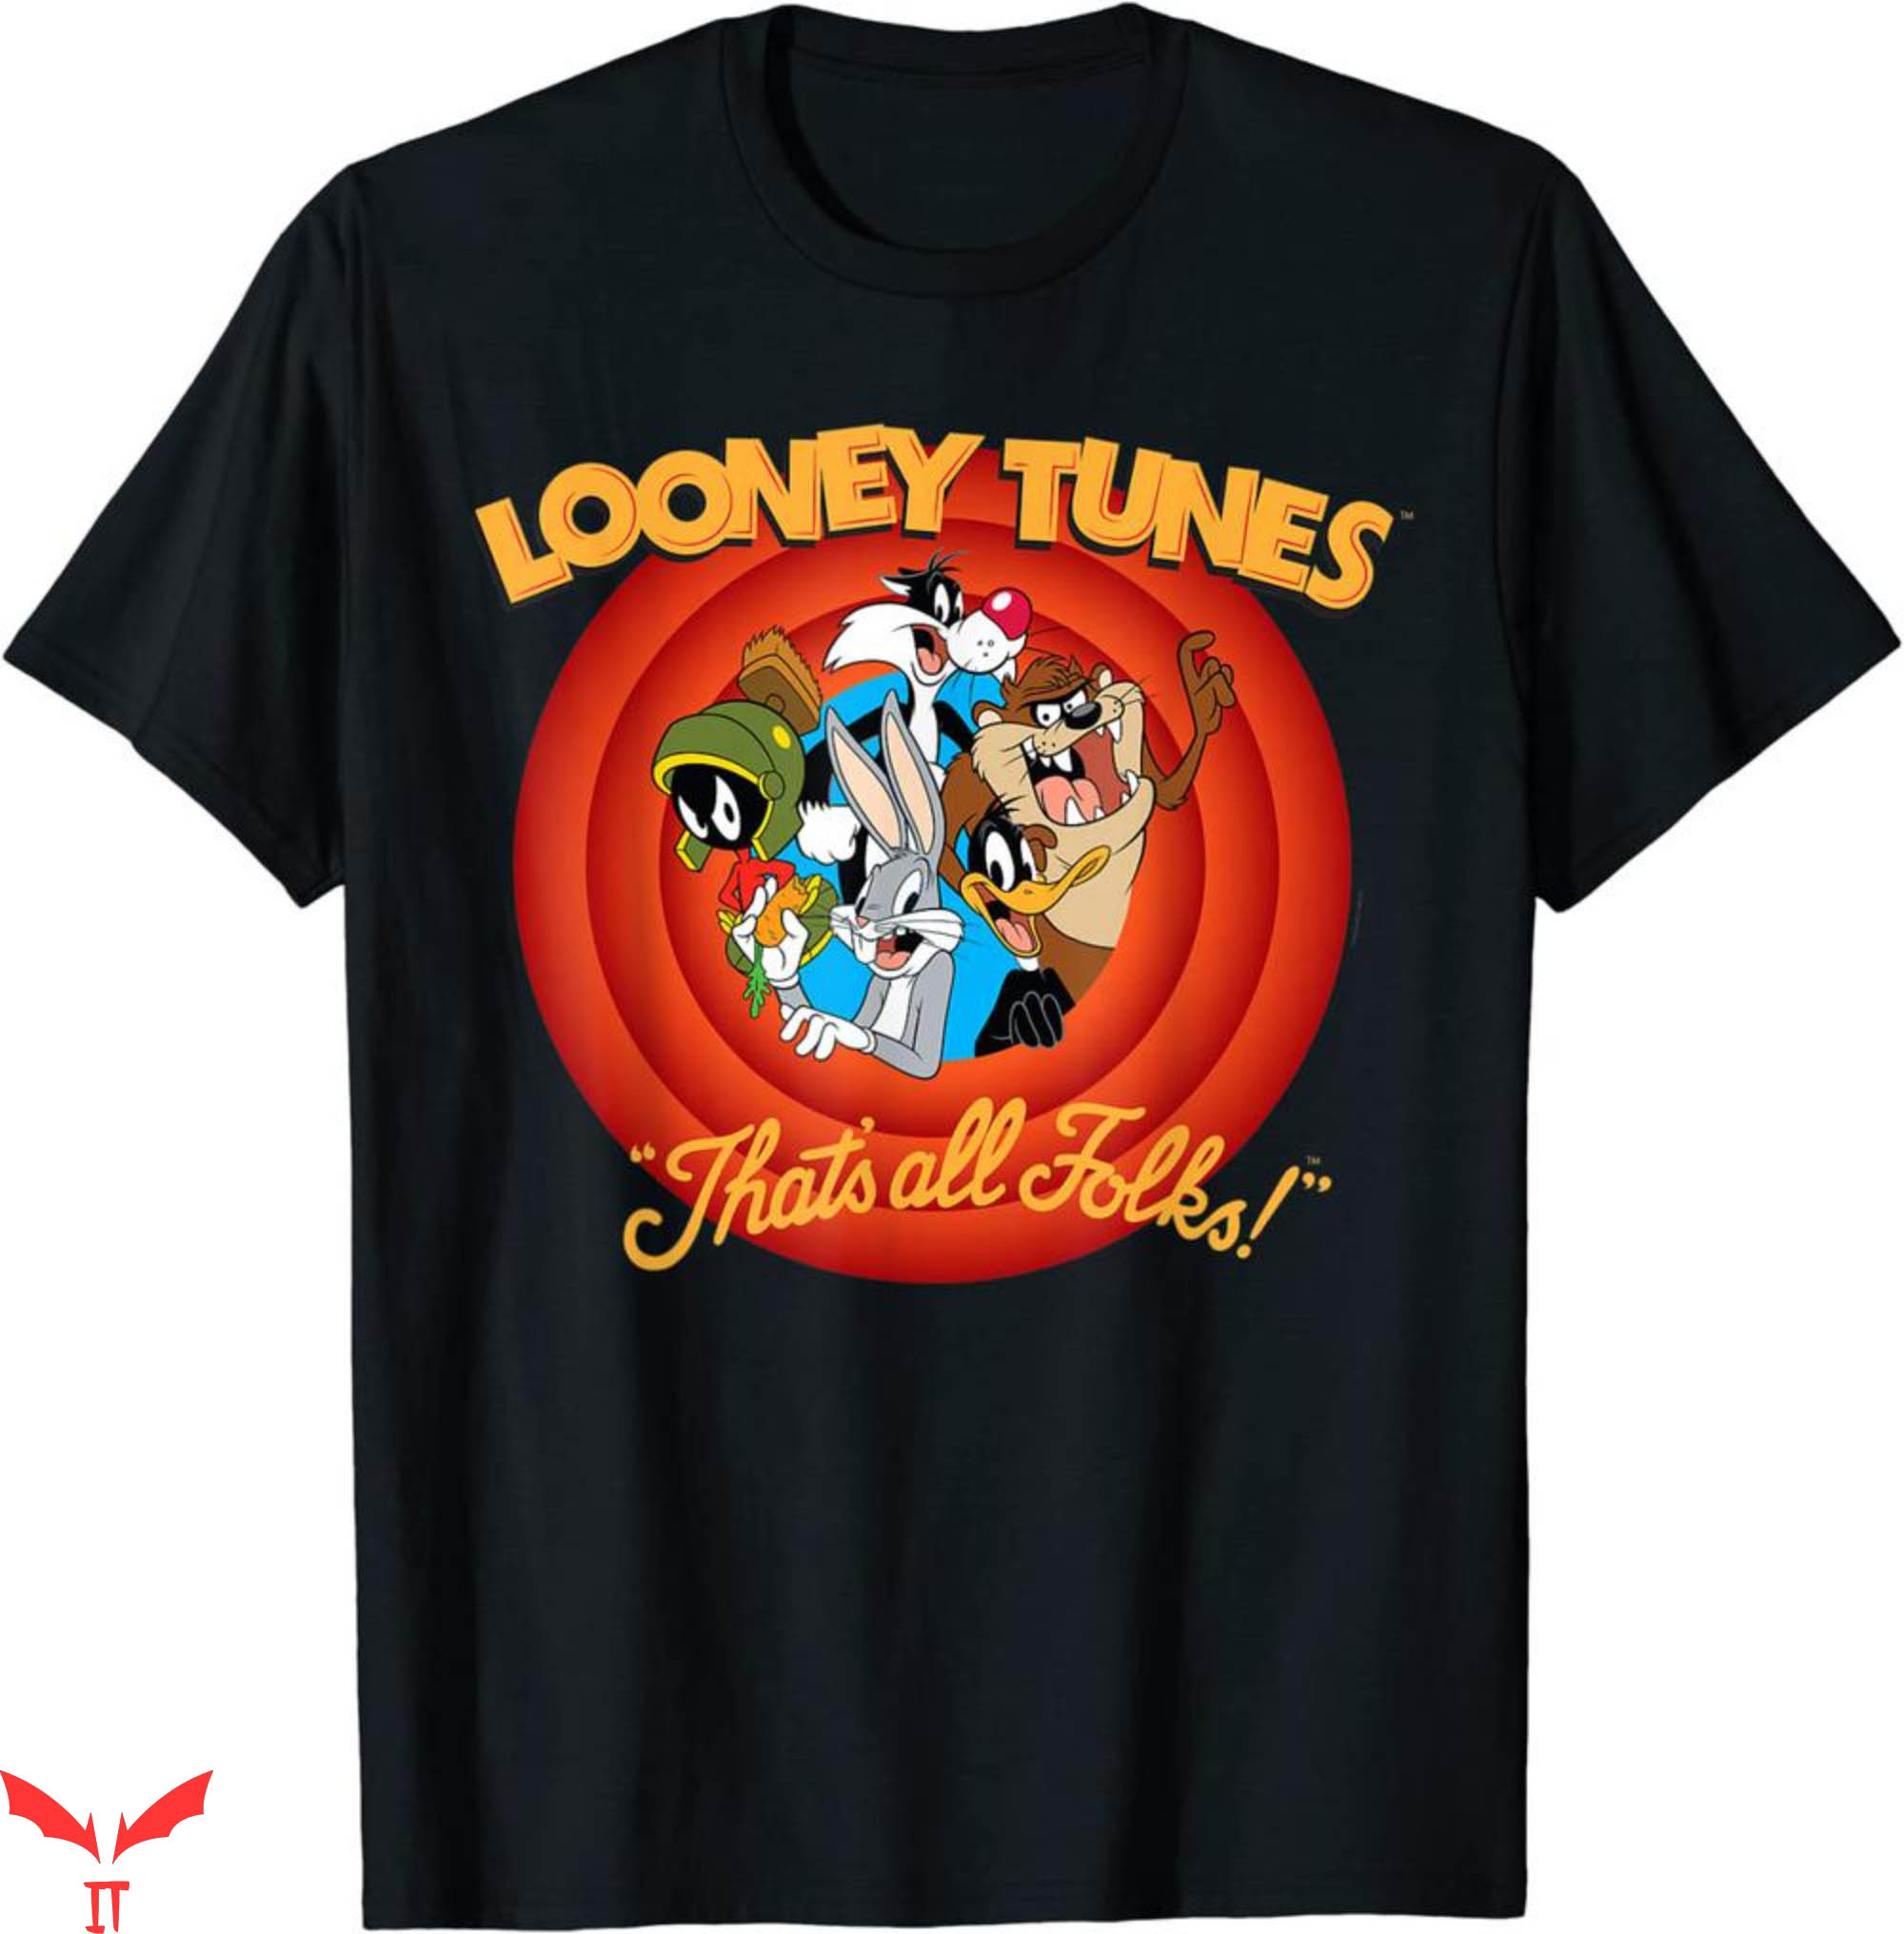 Vintage Looney Tunes T-Shirt That's All Folks Funny Cartoon